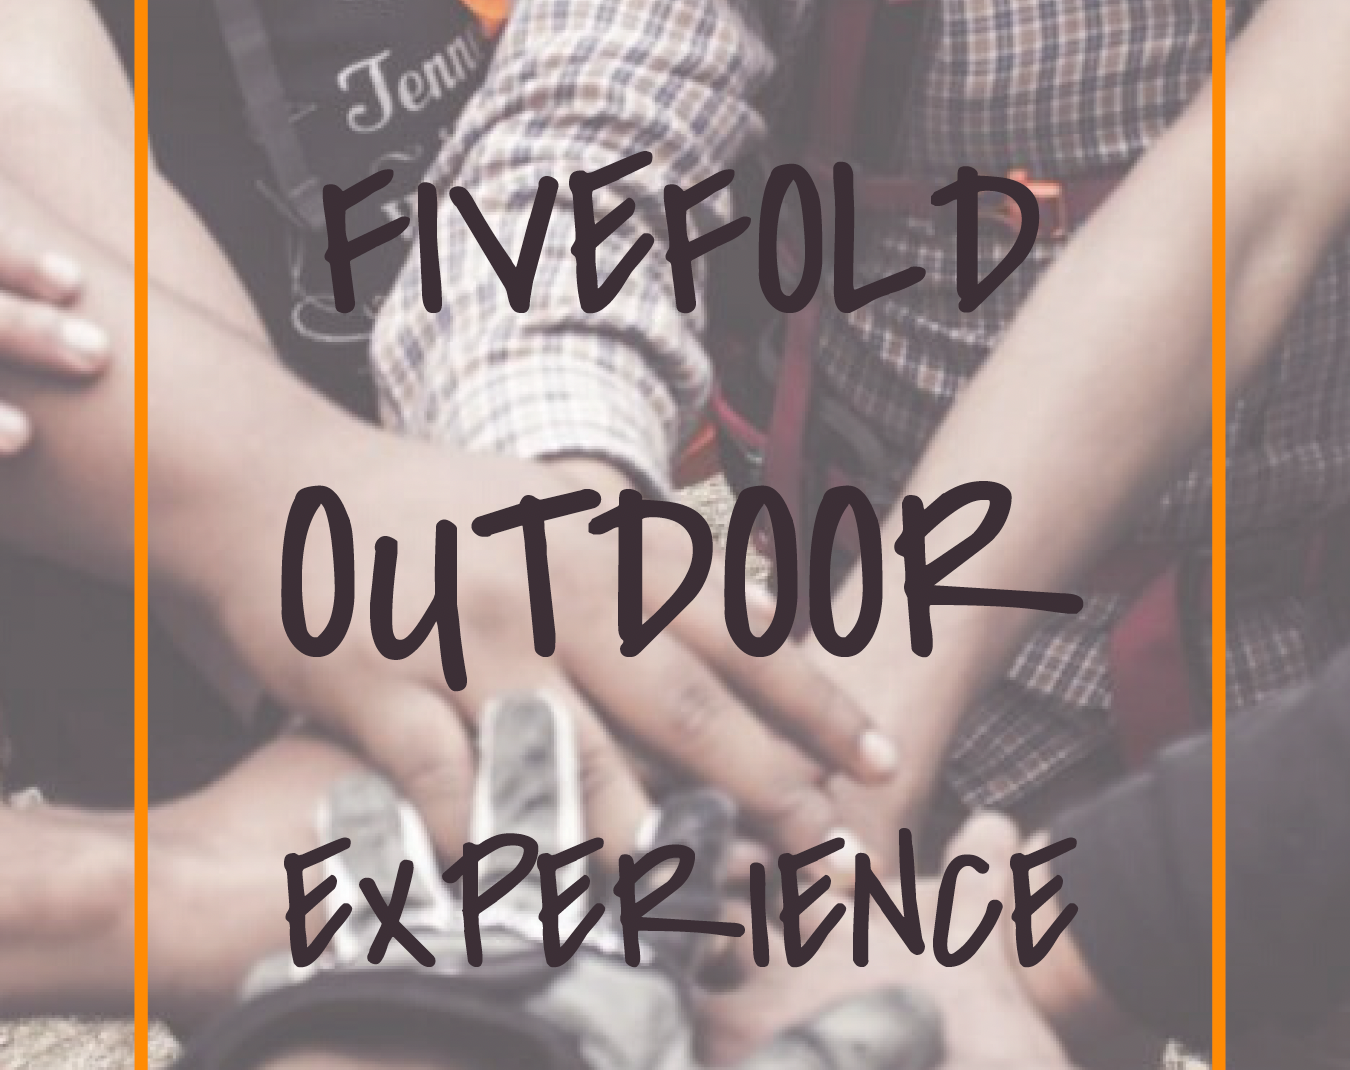 Fivefold Outdoor Experience